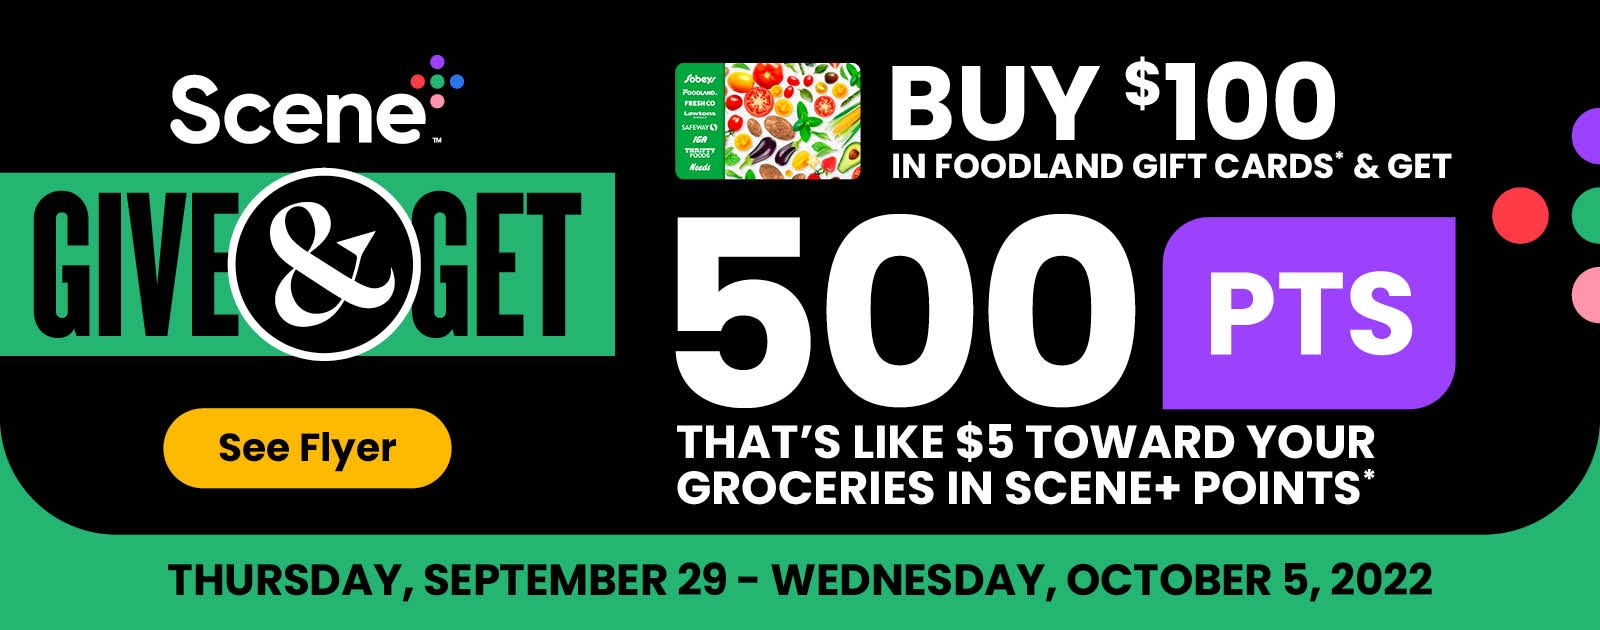 Text Reading 'Scene Plus Give & Get. Buy $100 in Foodland Gift Cards and get 500 Points. That's like $5 toward your groceries in Scene+ Points. Click on 'See flyer' button at the bottom at left. Offer valid from September 29 to October 5, 2022.'